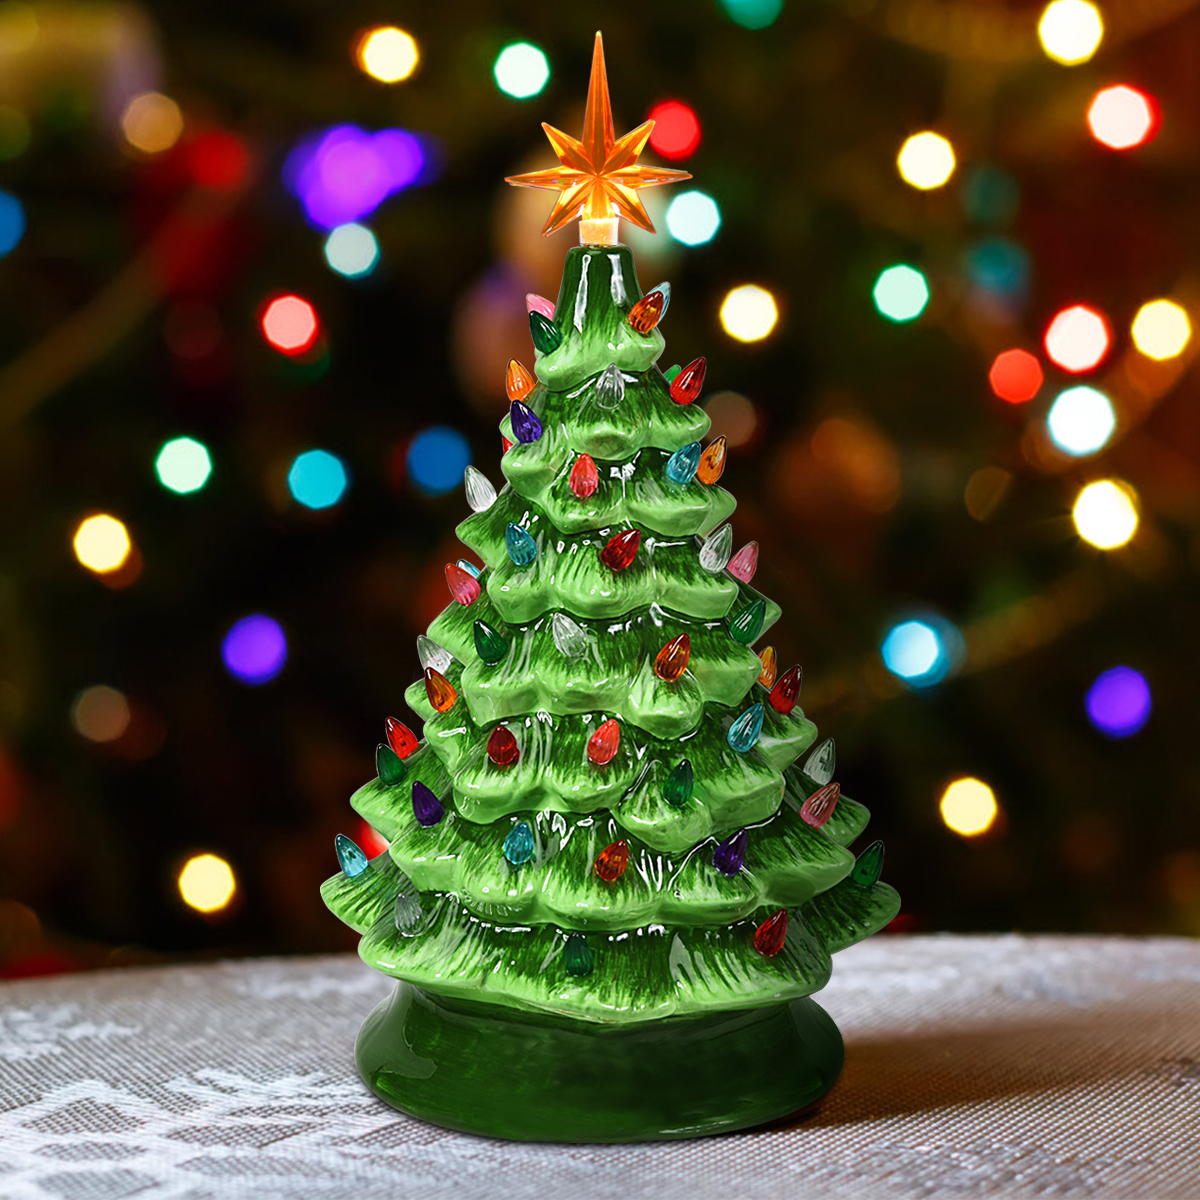 Colored lights Ceramic Christmas Tree-Handcrafted and Hand Painted